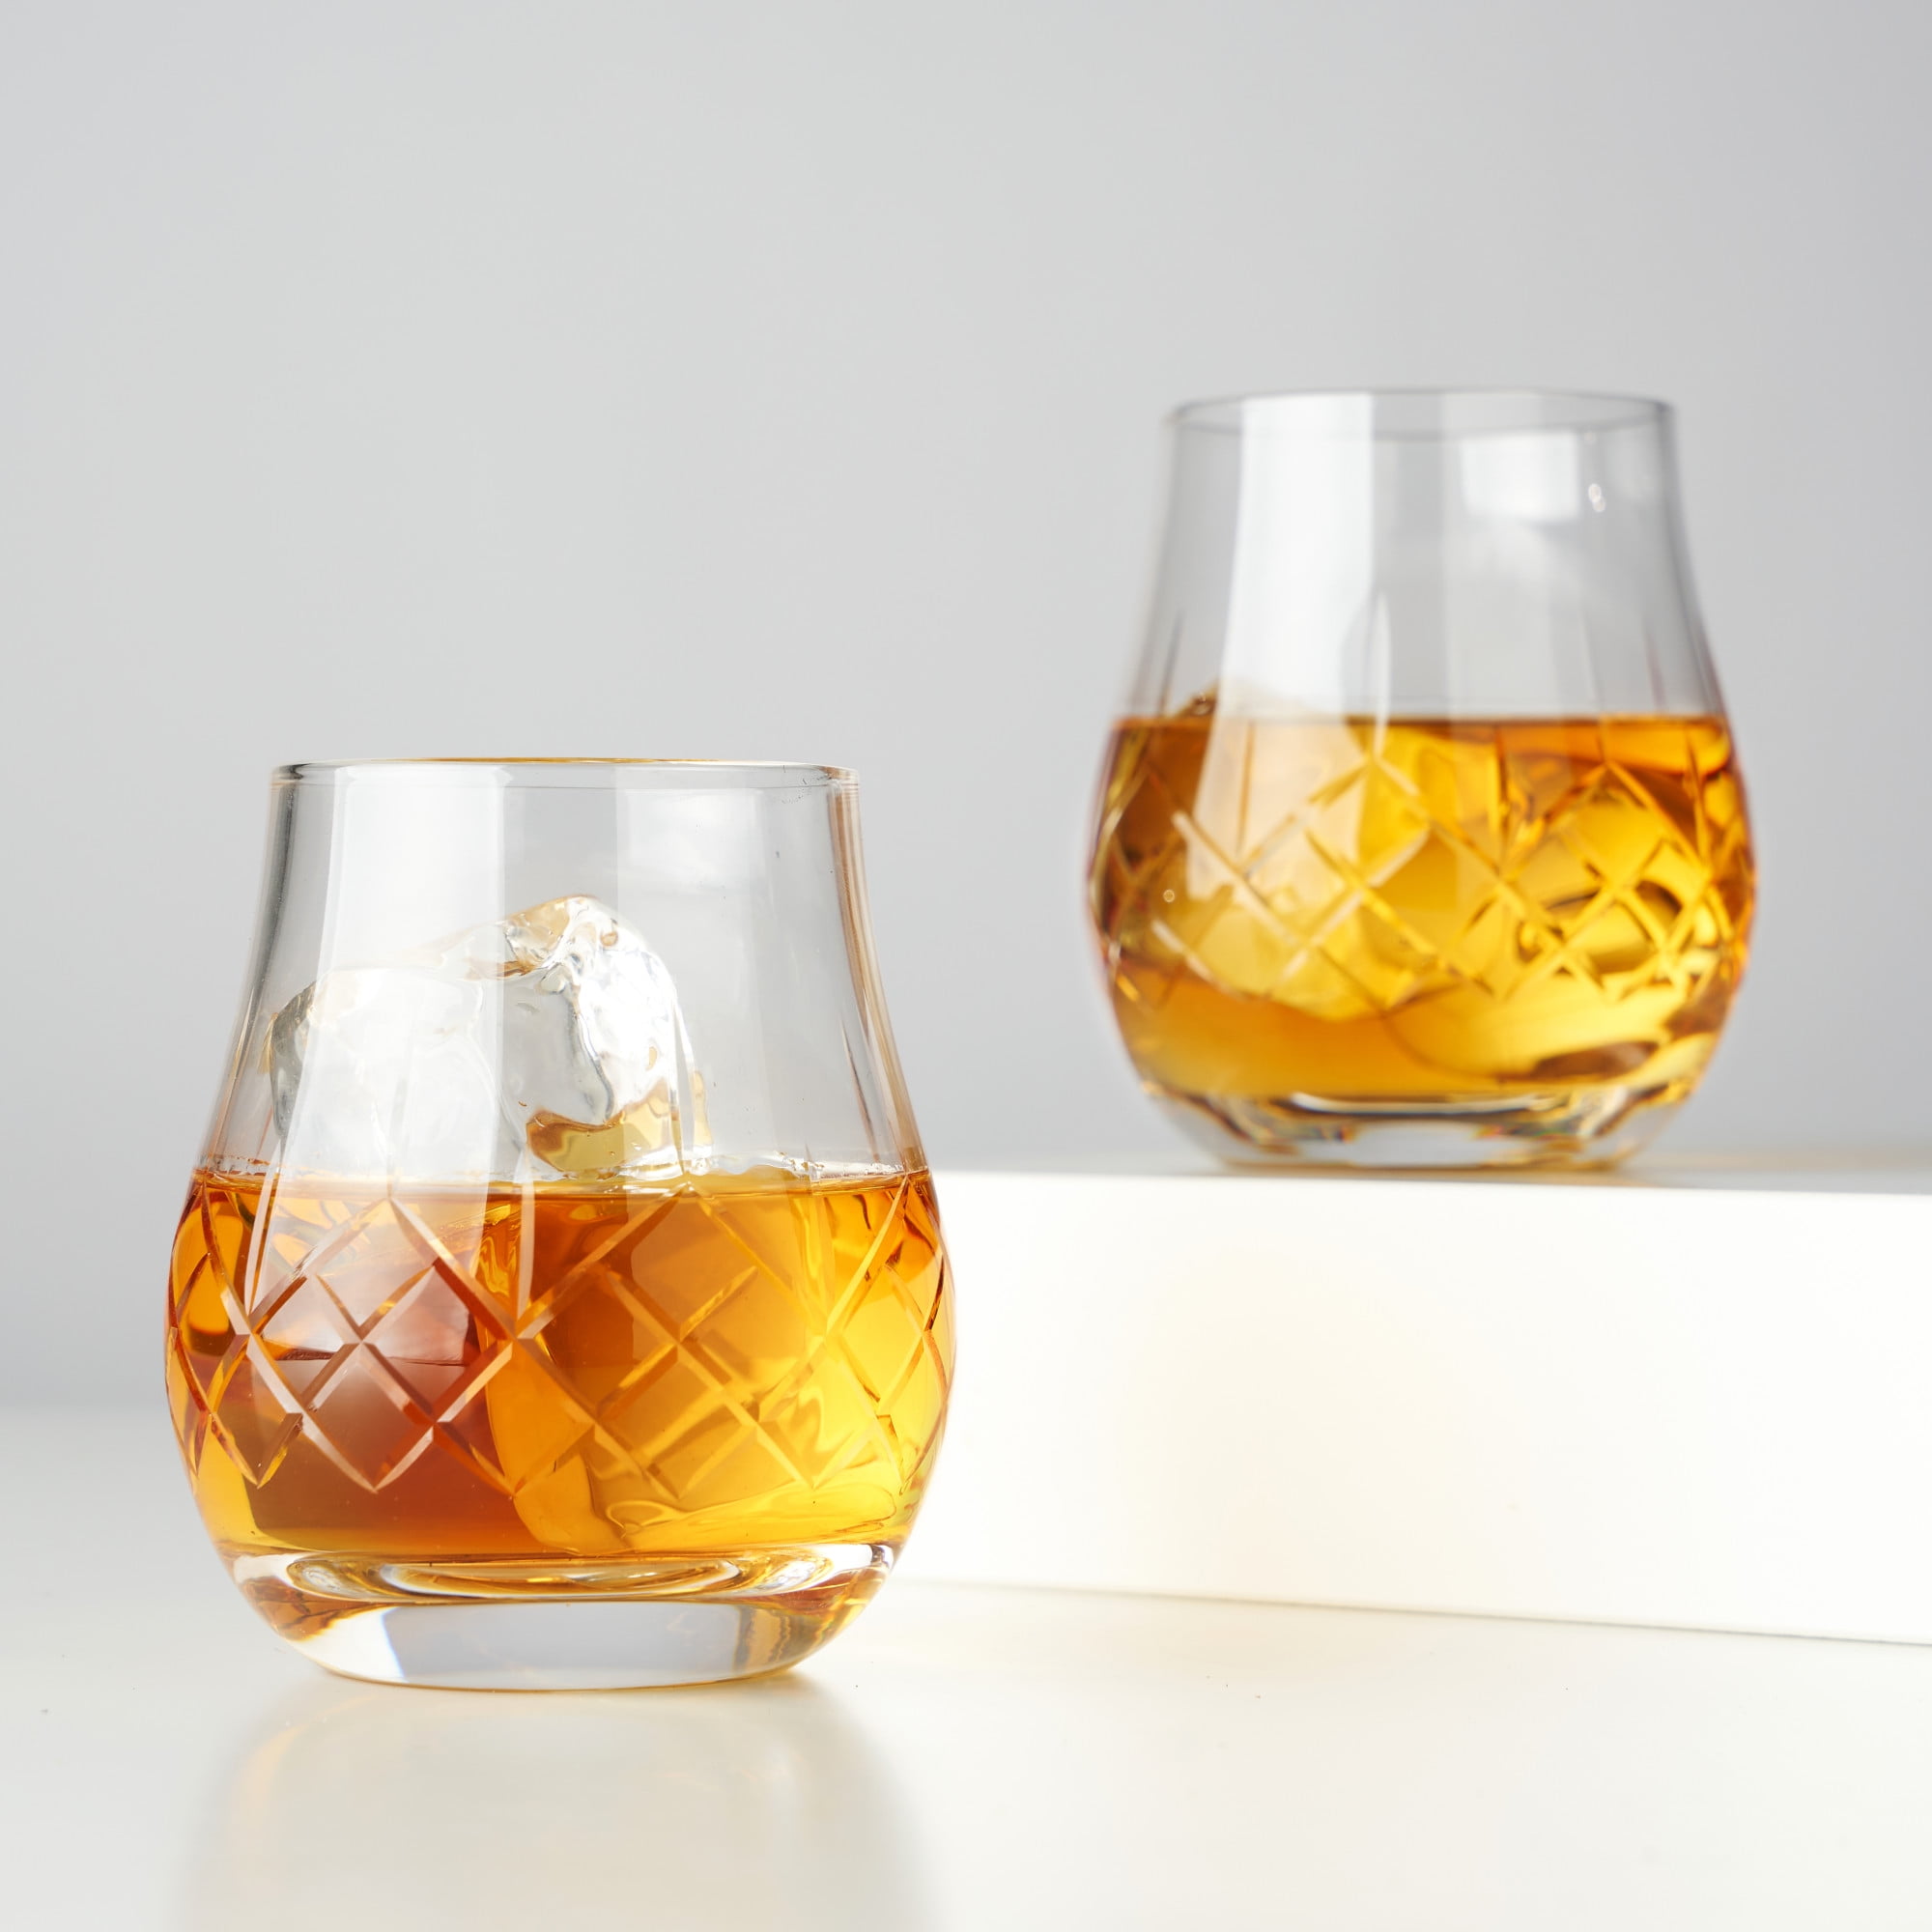 Admiral 9 oz. Crystal Whiskey Glass